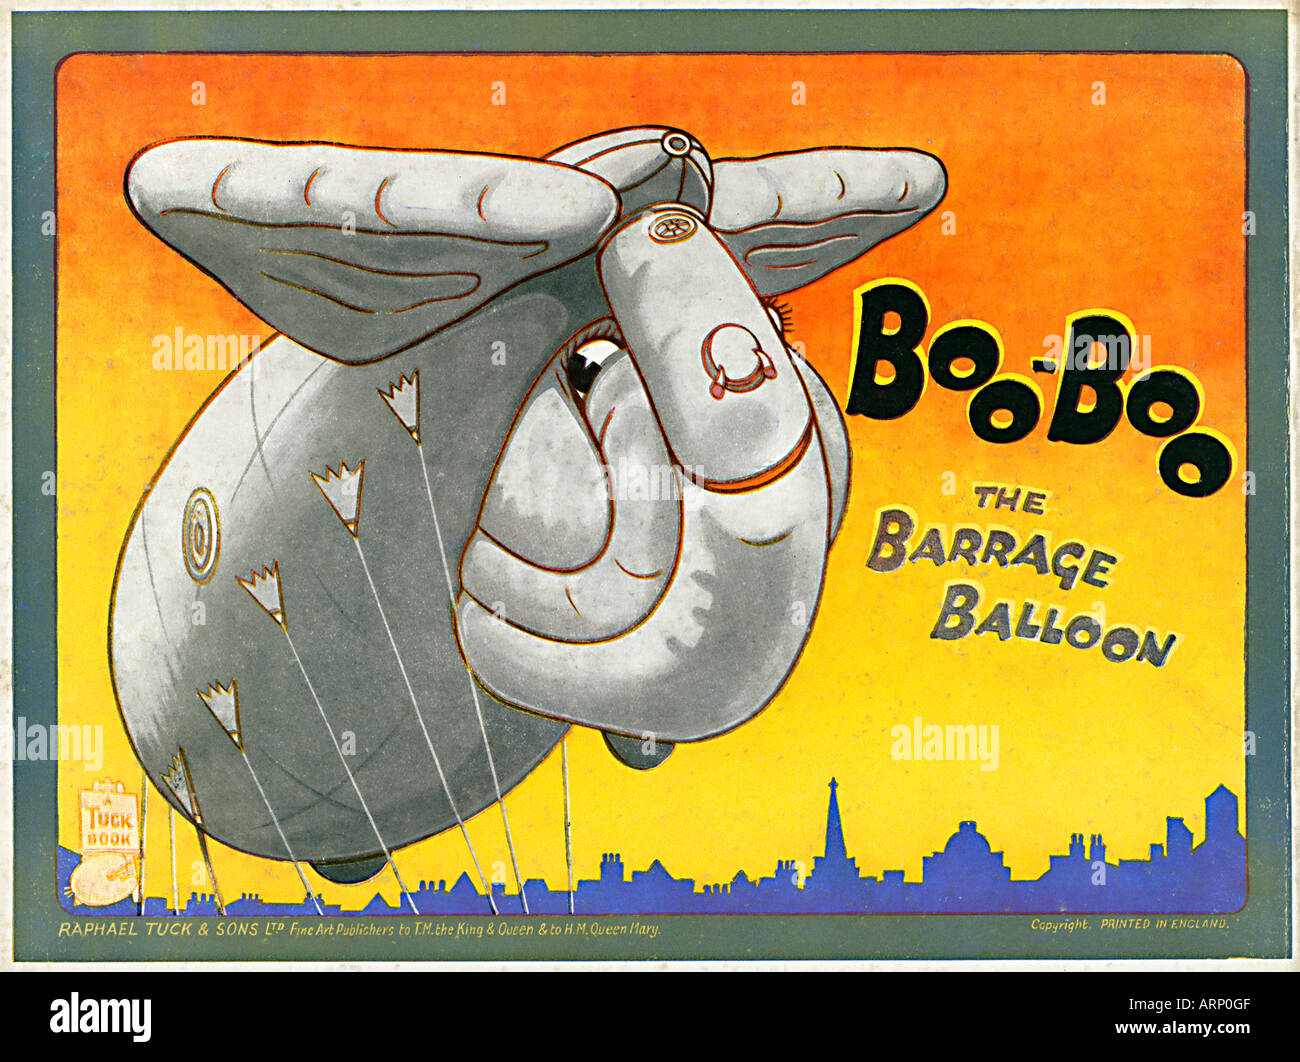 Boo Boo The Barrage Balloon 1940 English Childrens illustrated picture book from the Blitz Stock Photo